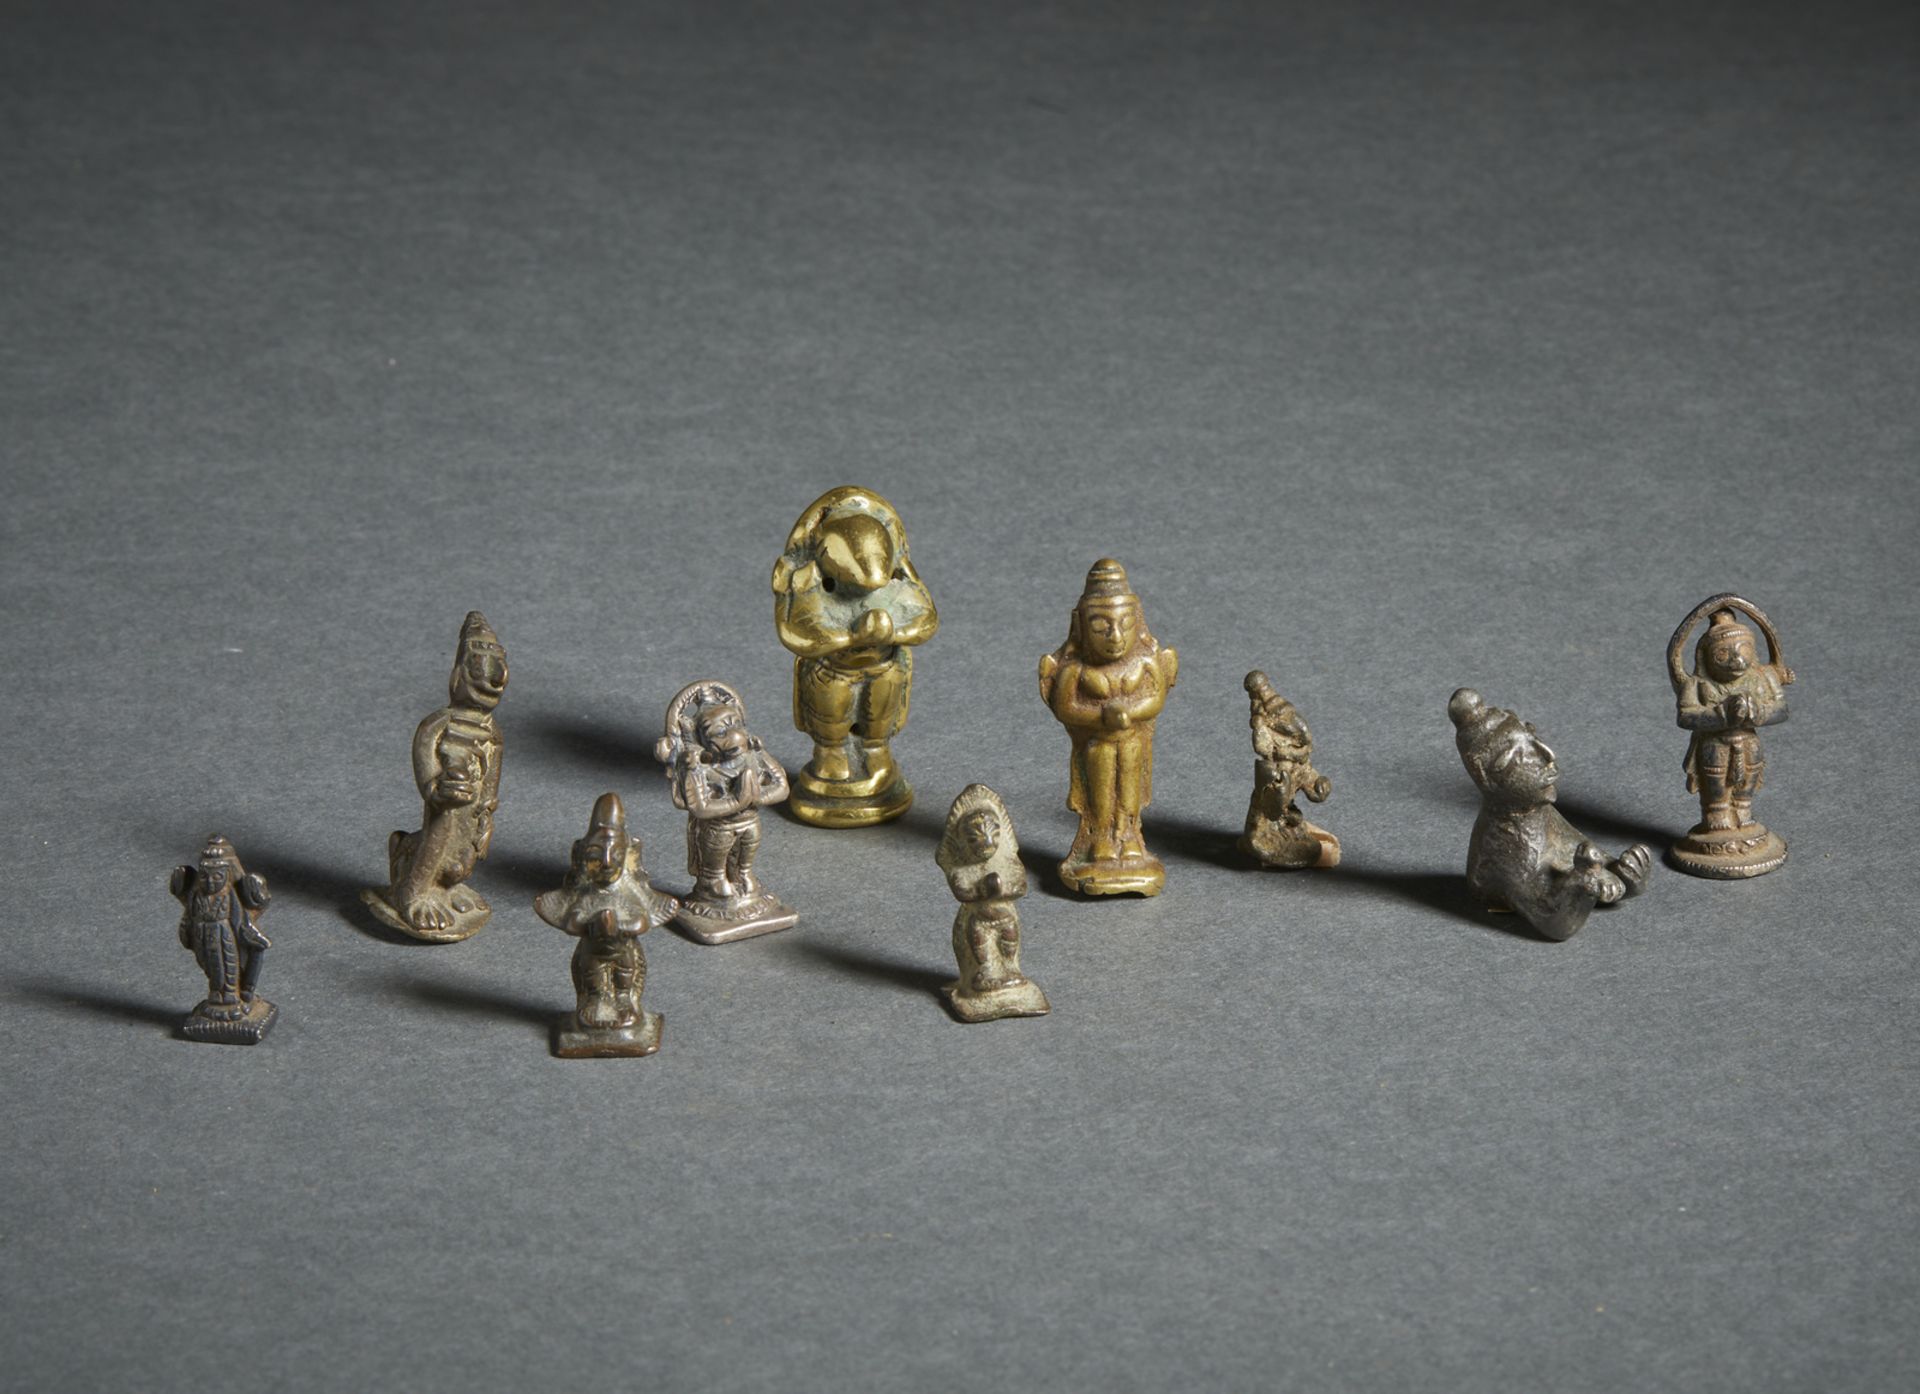 A group of 10 miniature devotional bronze figures India, 19th century The size shown refers to the